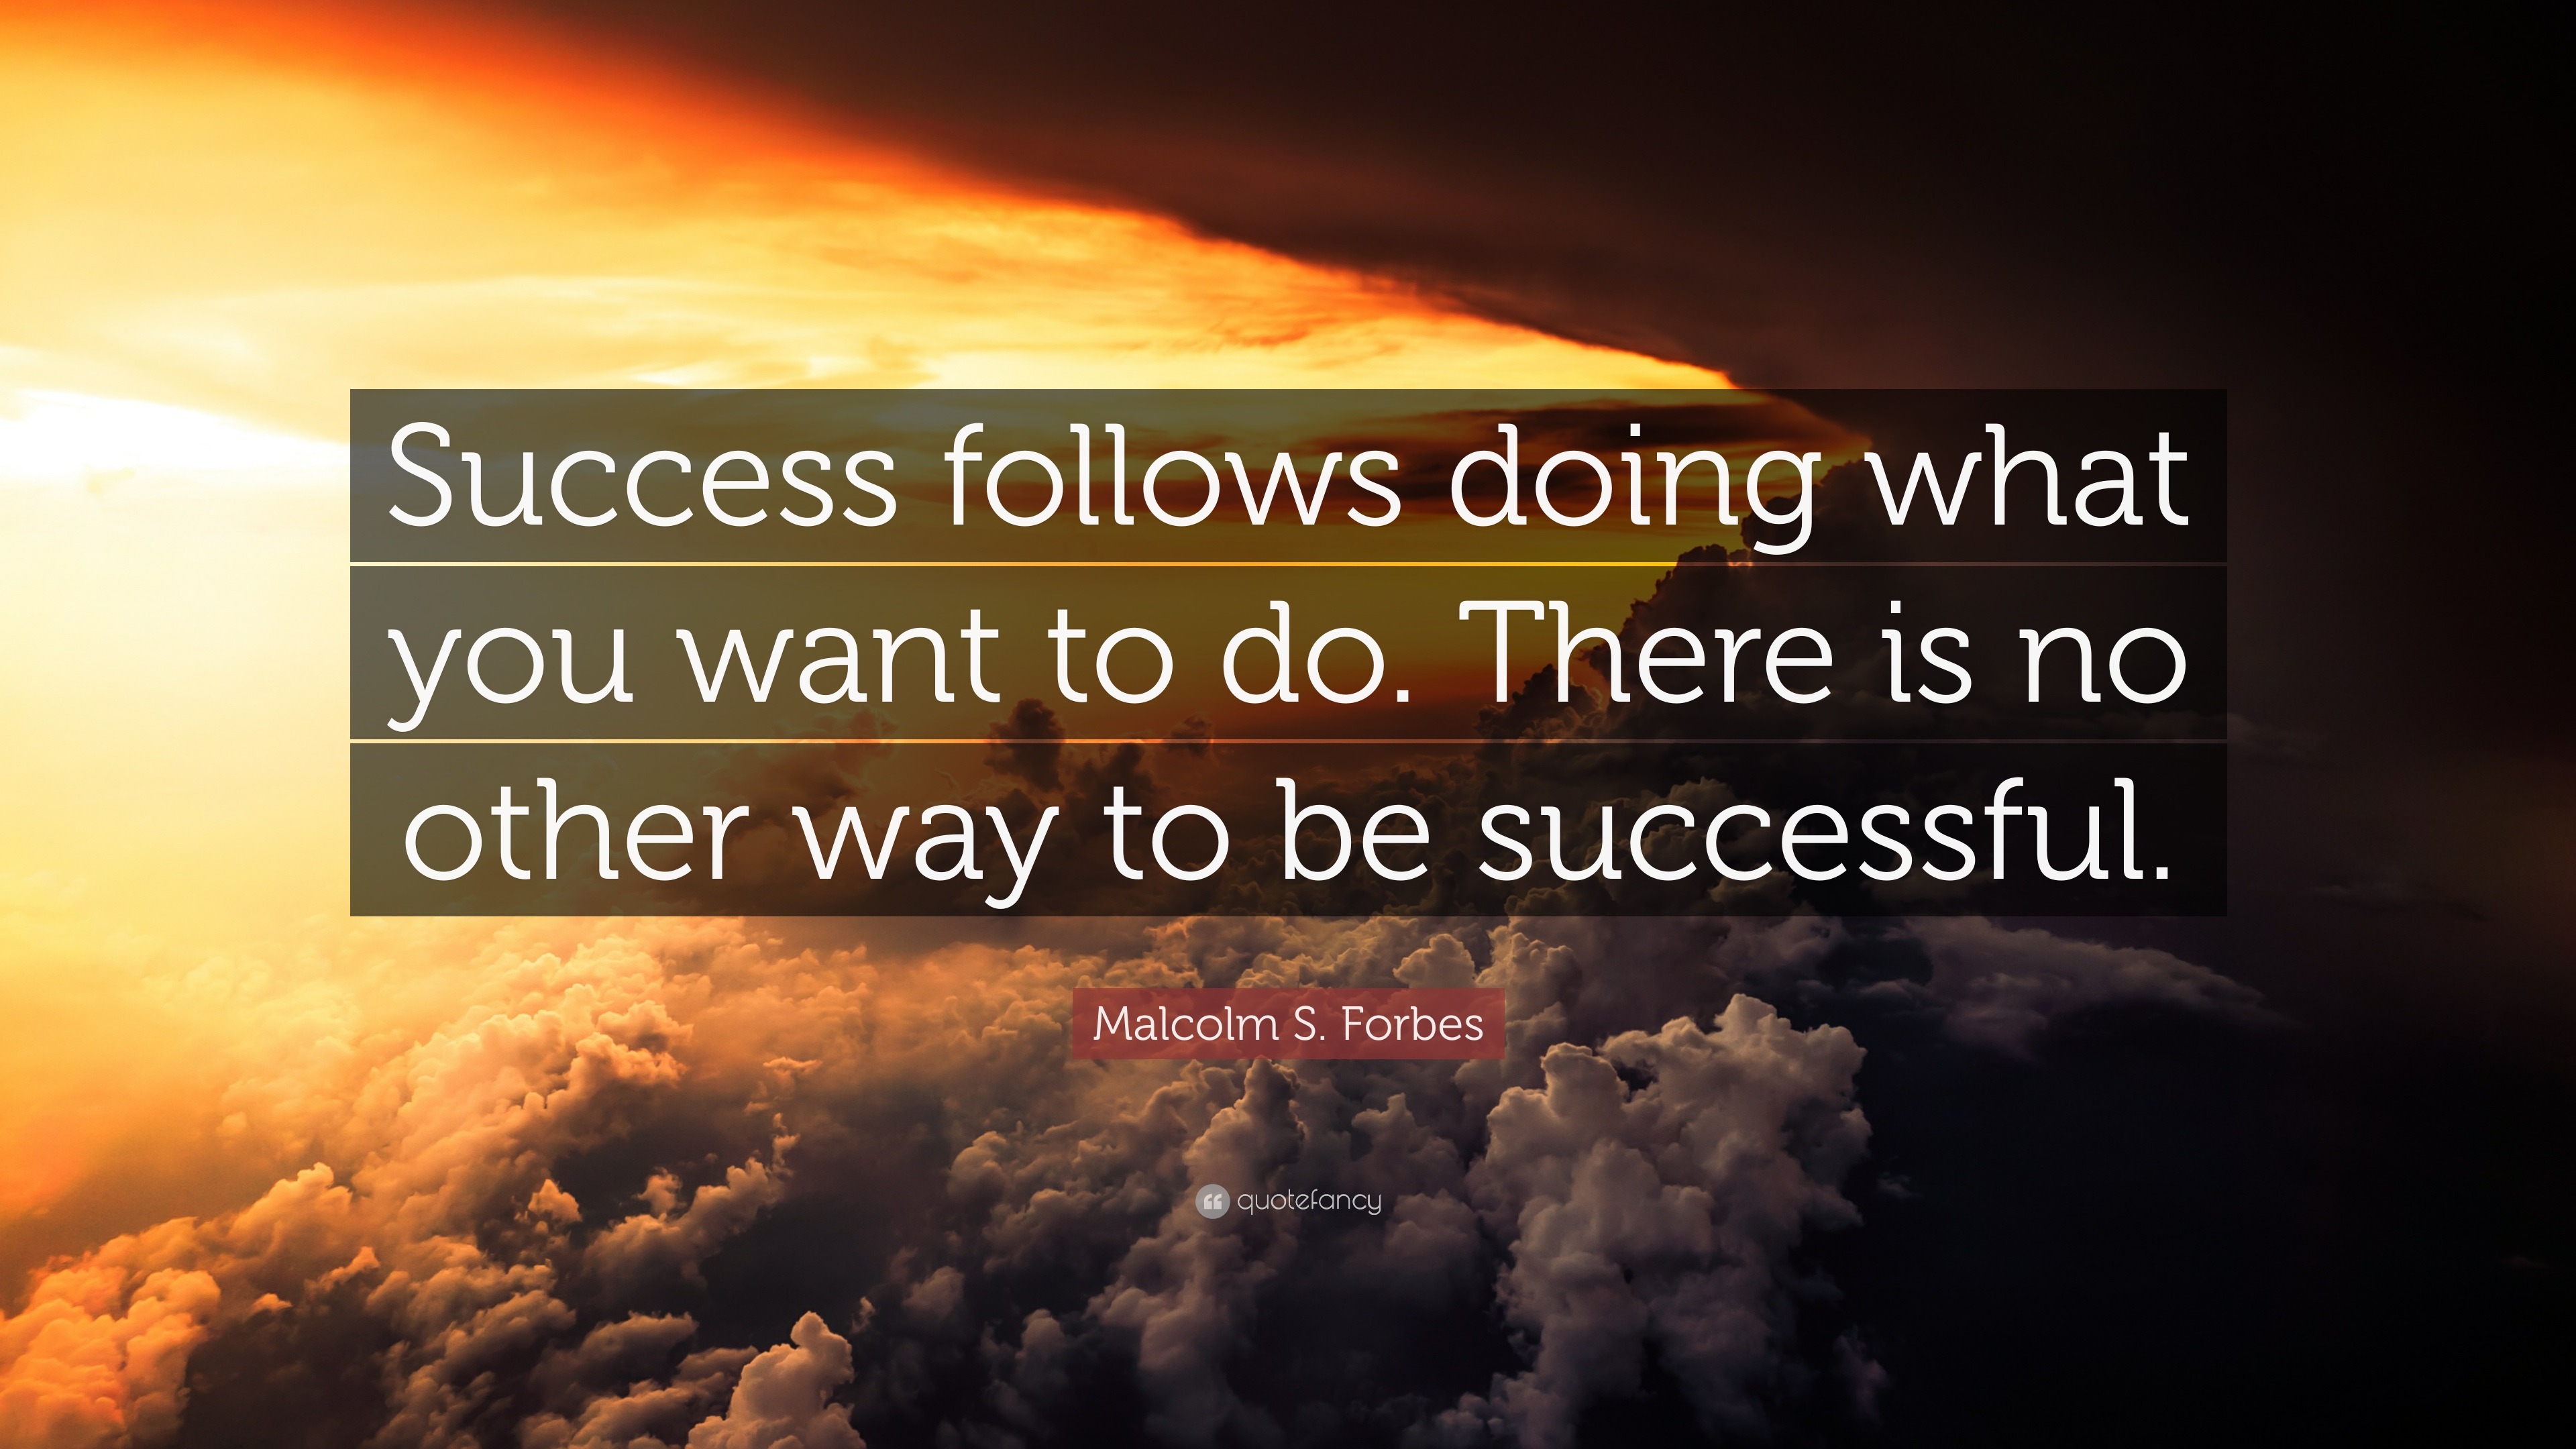 Malcolm S. Forbes Quote: “Success follows doing what you want to do ...